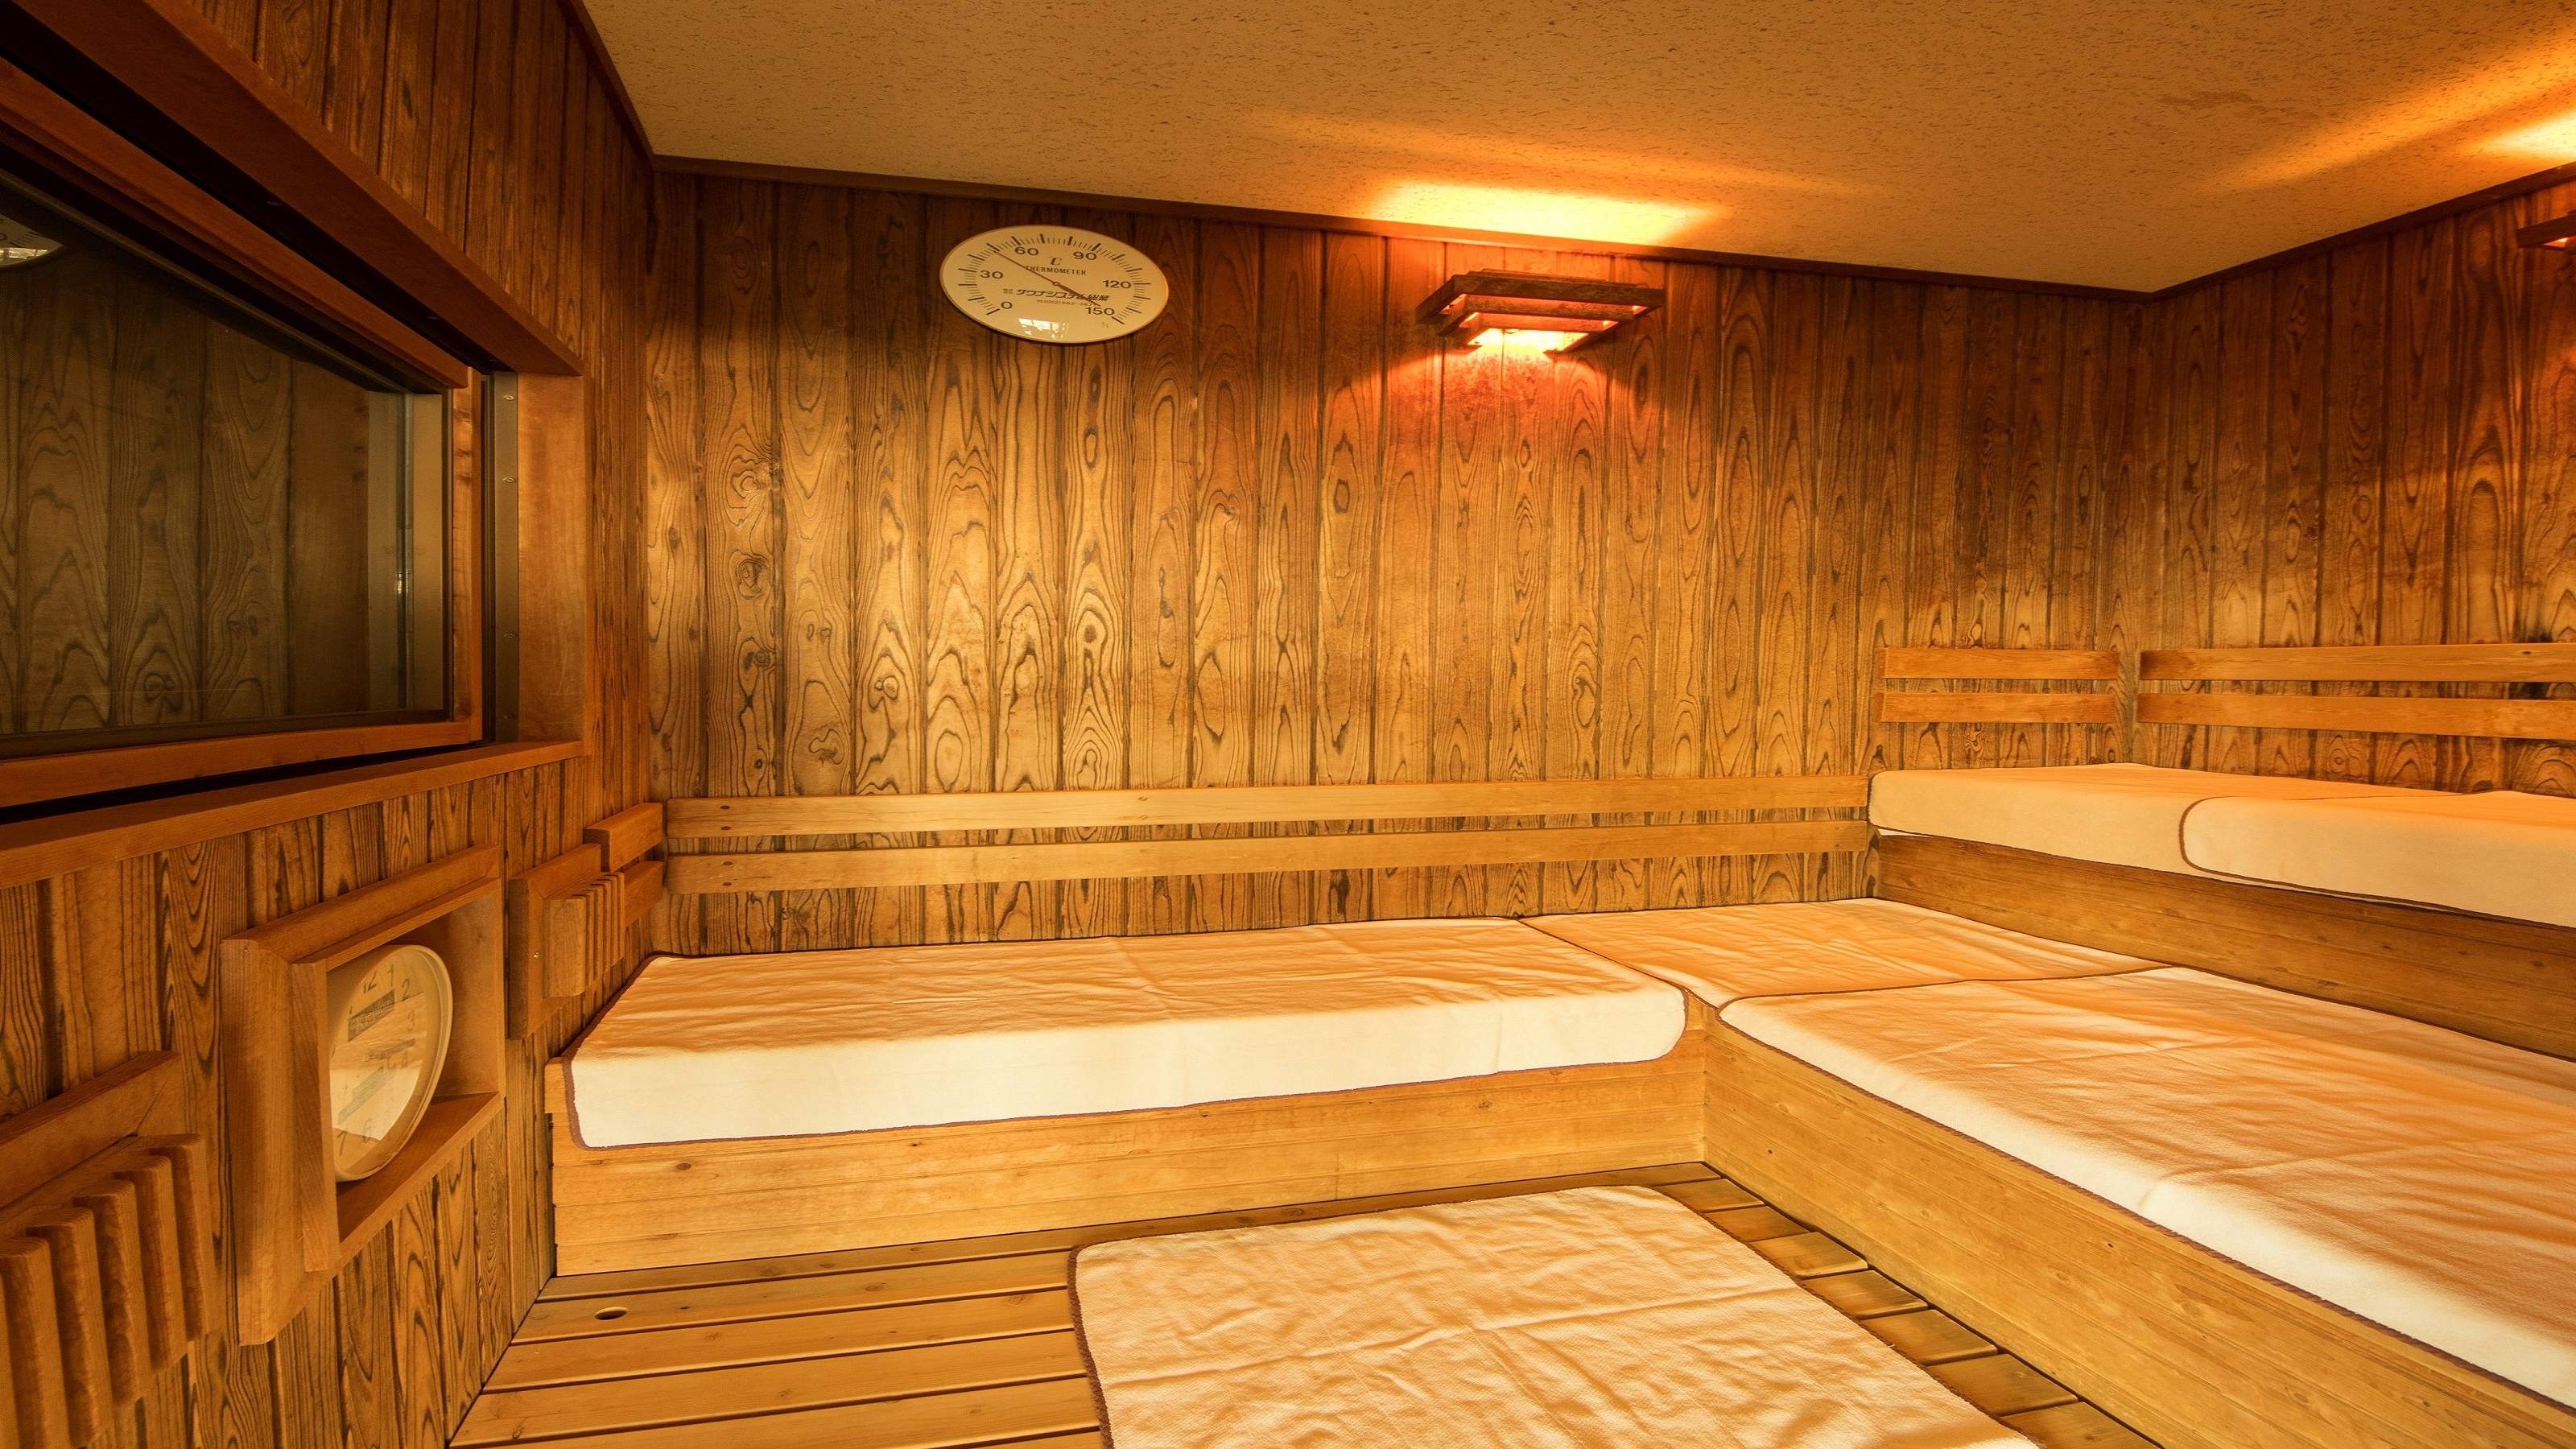 ■ Sauna [Capacity: 6 people] Usage time 15:00 to 10:00 the next morning (stops from 1:00 to 5:00 at midnight) (Temperature: 96 ° C)